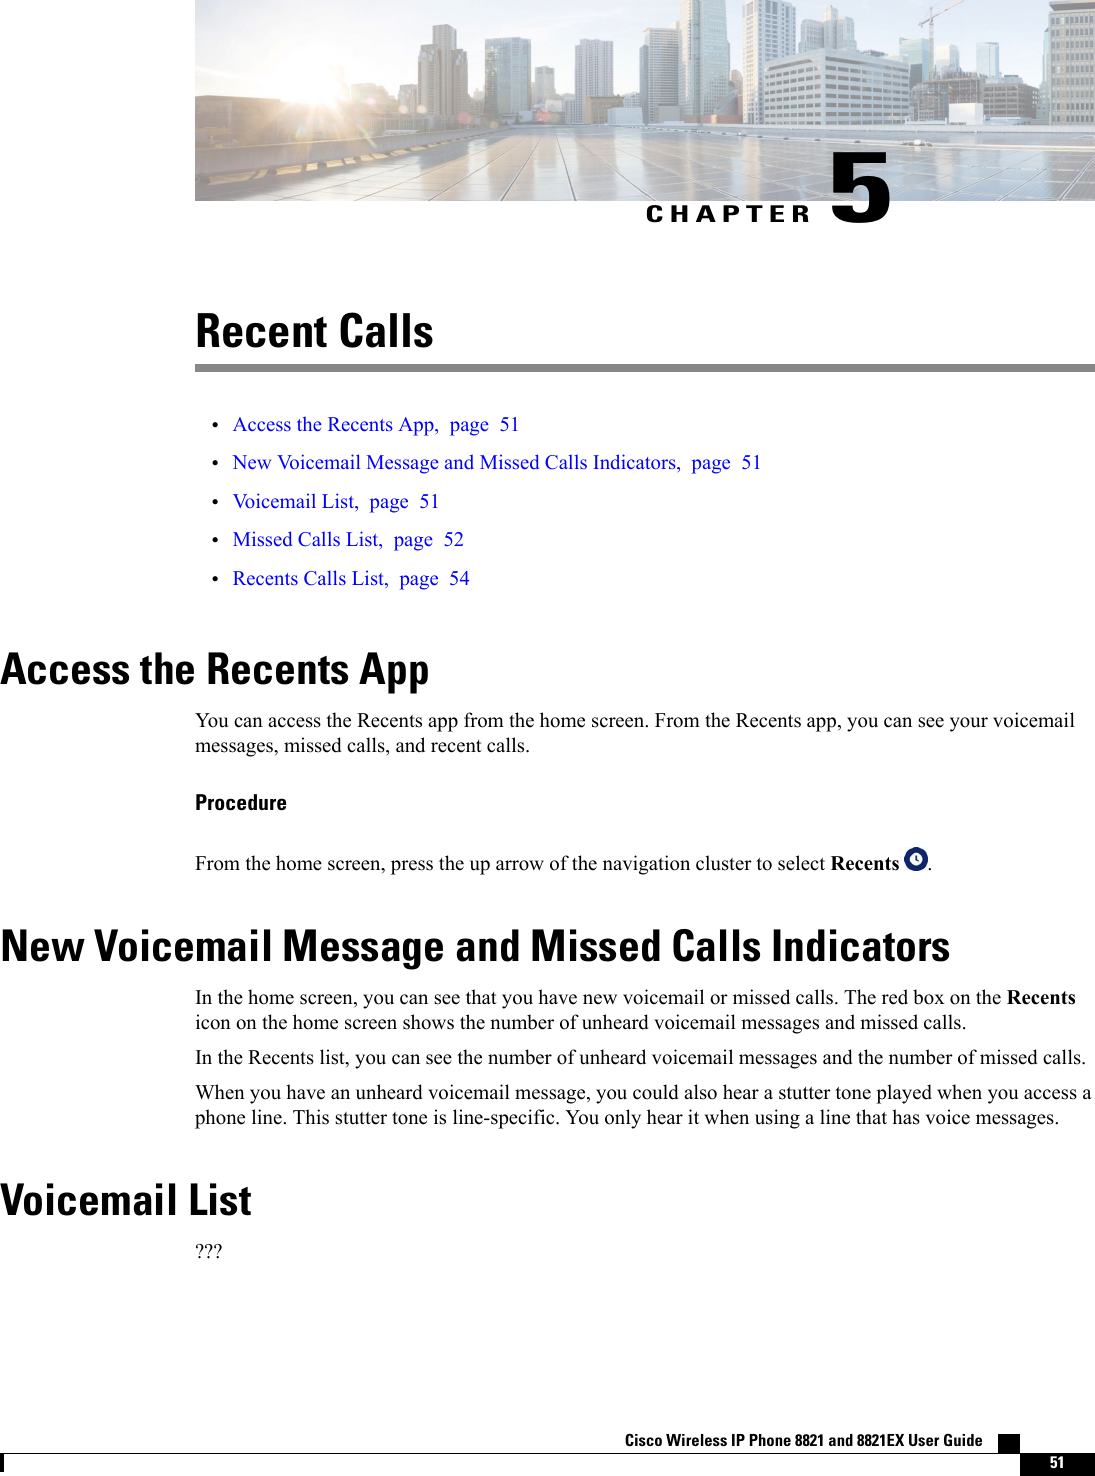 CHAPTER 5Recent Calls•Access the Recents App, page 51•New Voicemail Message and Missed Calls Indicators, page 51•Voicemail List, page 51•Missed Calls List, page 52•Recents Calls List, page 54Access the Recents AppYou can access the Recents app from the home screen. From the Recents app, you can see your voicemailmessages, missed calls, and recent calls.ProcedureFrom the home screen, press the up arrow of the navigation cluster to select Recents .New Voicemail Message and Missed Calls IndicatorsIn the home screen, you can see that you have new voicemail or missed calls. The red box on the Recentsicon on the home screen shows the number of unheard voicemail messages and missed calls.In the Recents list, you can see the number of unheard voicemail messages and the number of missed calls.When you have an unheard voicemail message, you could also hear a stutter tone played when you access aphone line. This stutter tone is line-specific. You only hear it when using a line that has voice messages.Voicemail List???Cisco Wireless IP Phone 8821 and 8821EX User Guide    51